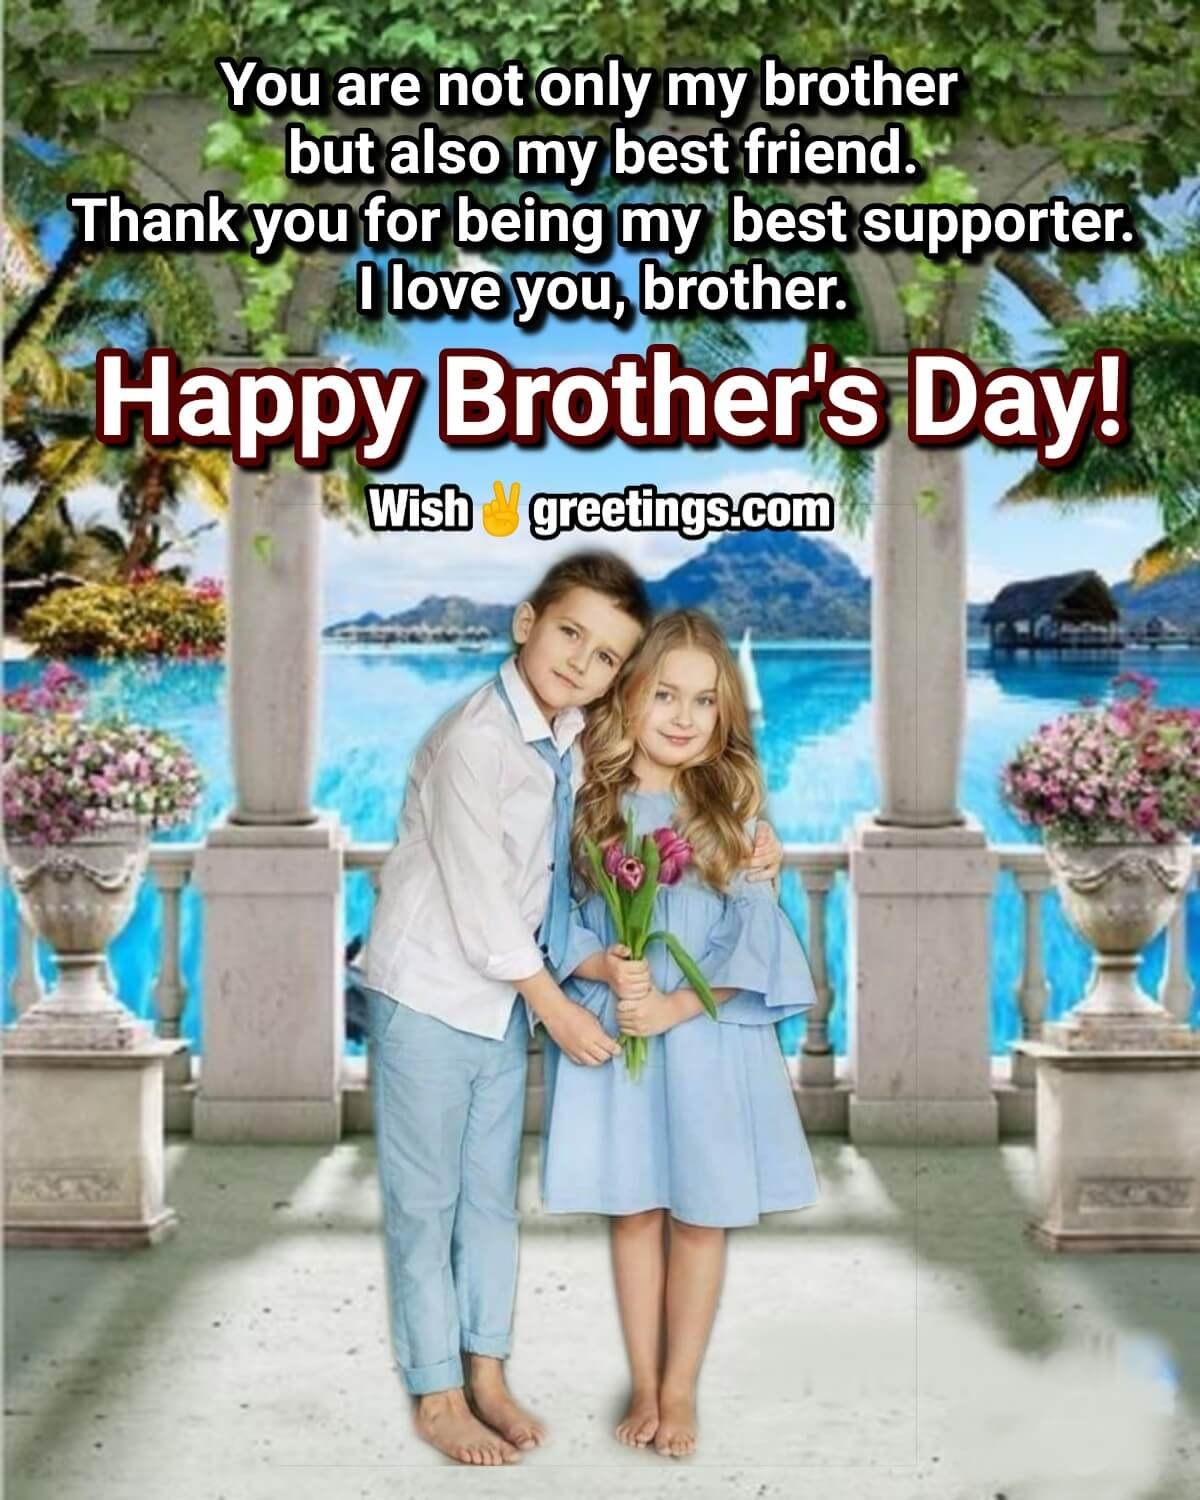 Best Brothers Day Image